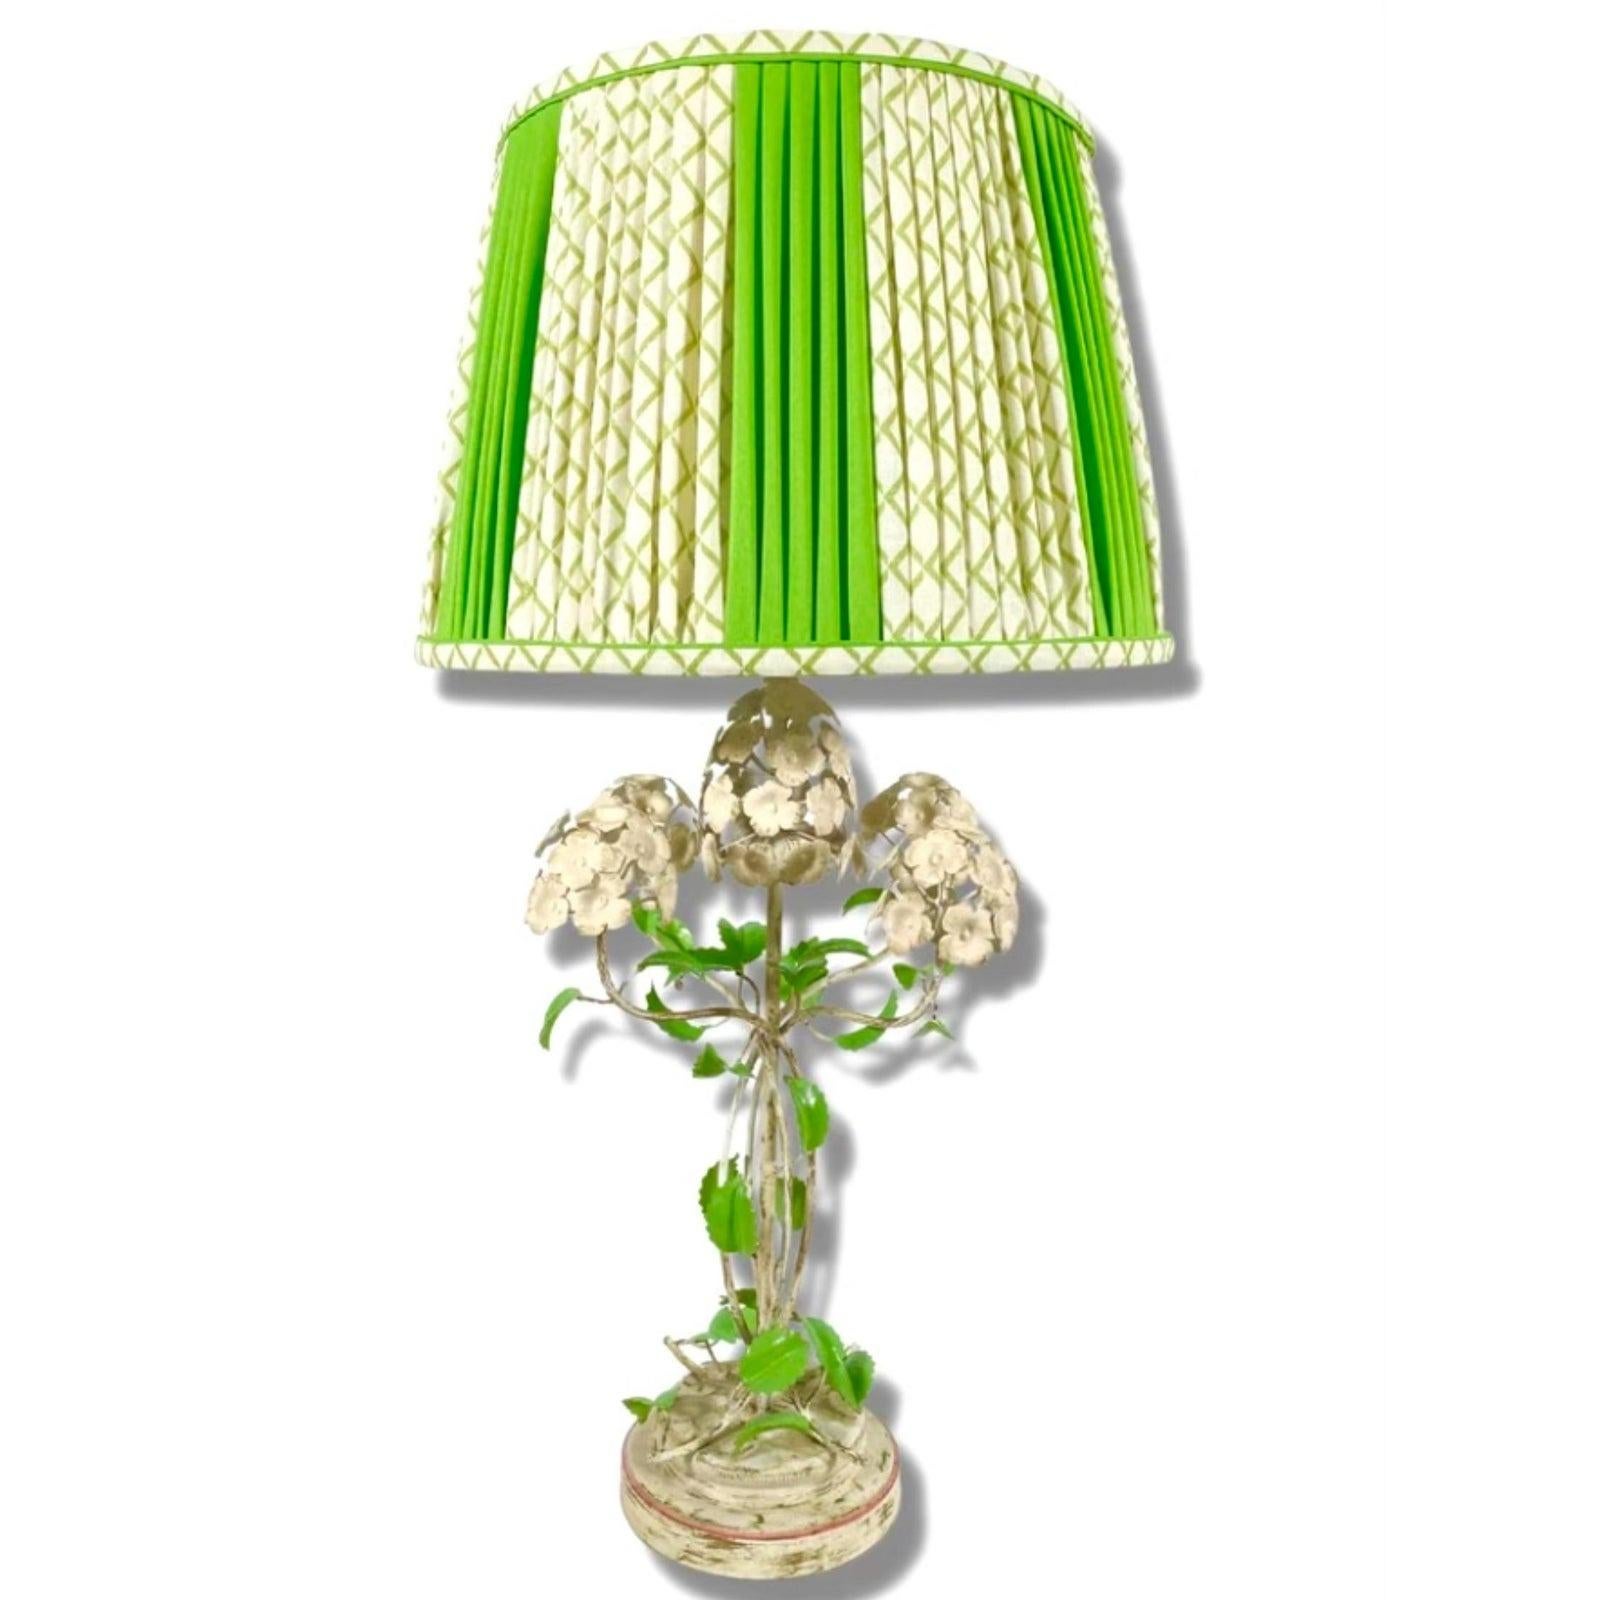 Mid-20th Century Vintage Metal Floral Lamp with Matching Shade For Sale